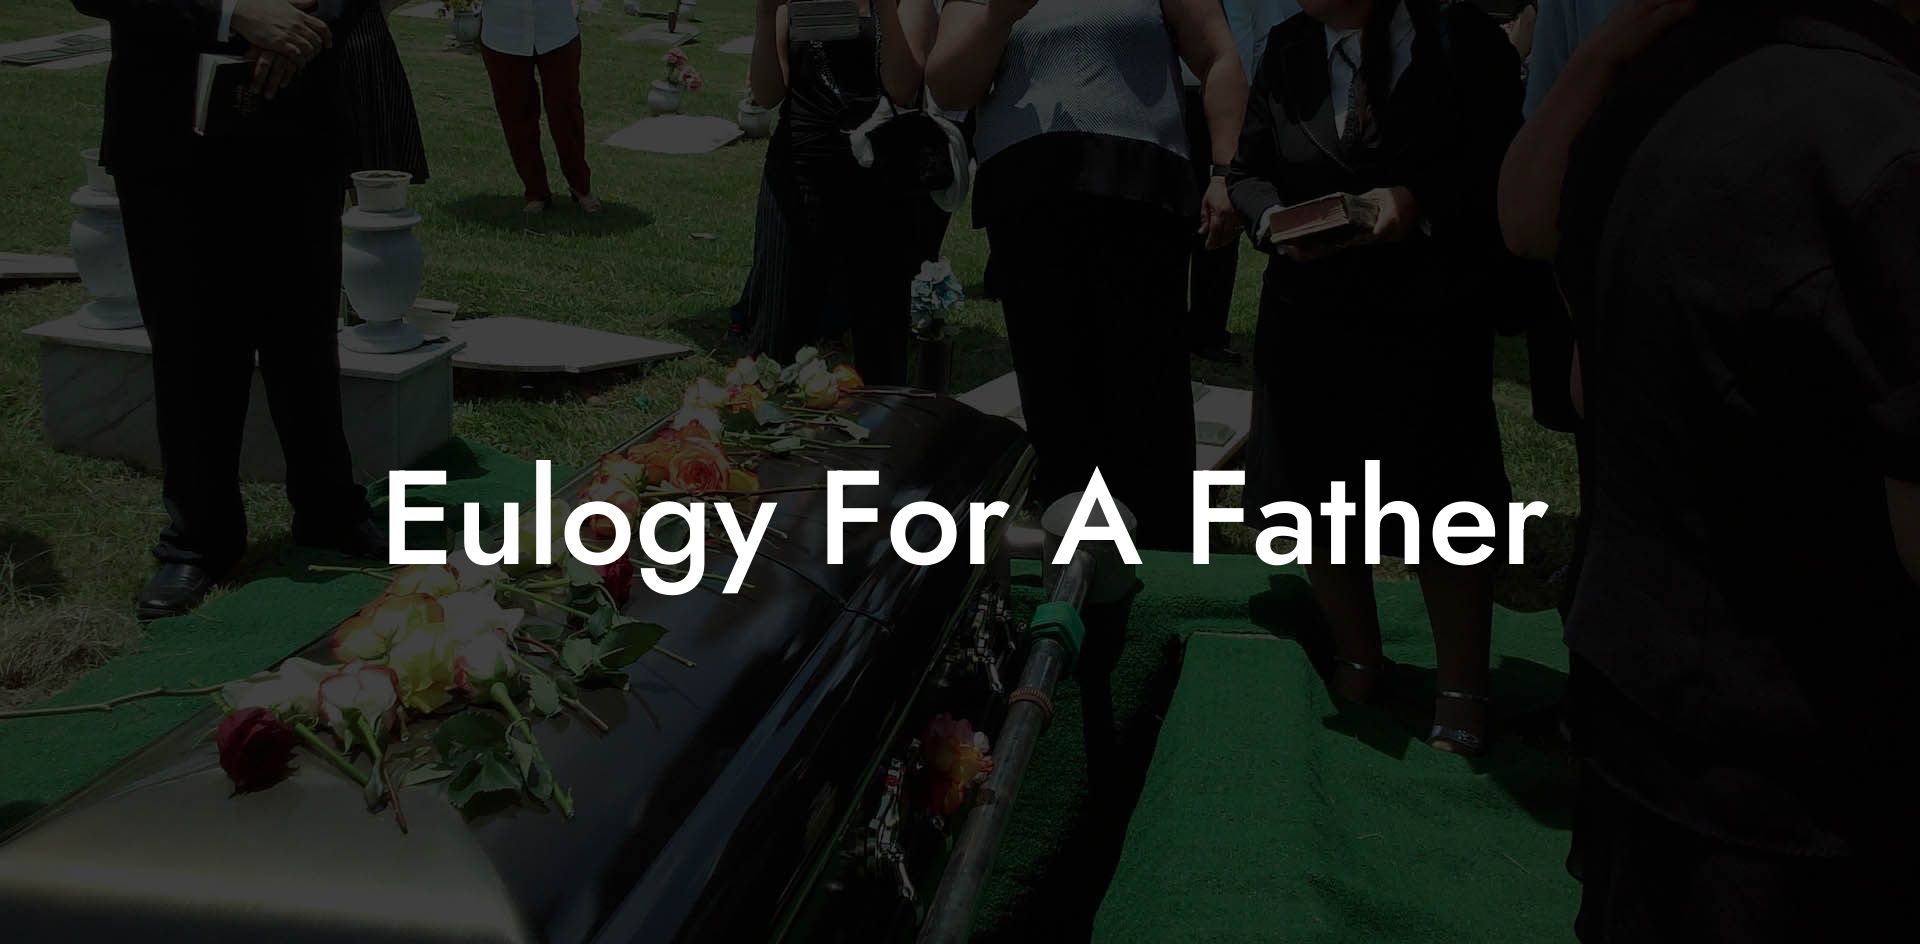 Eulogy For A Father